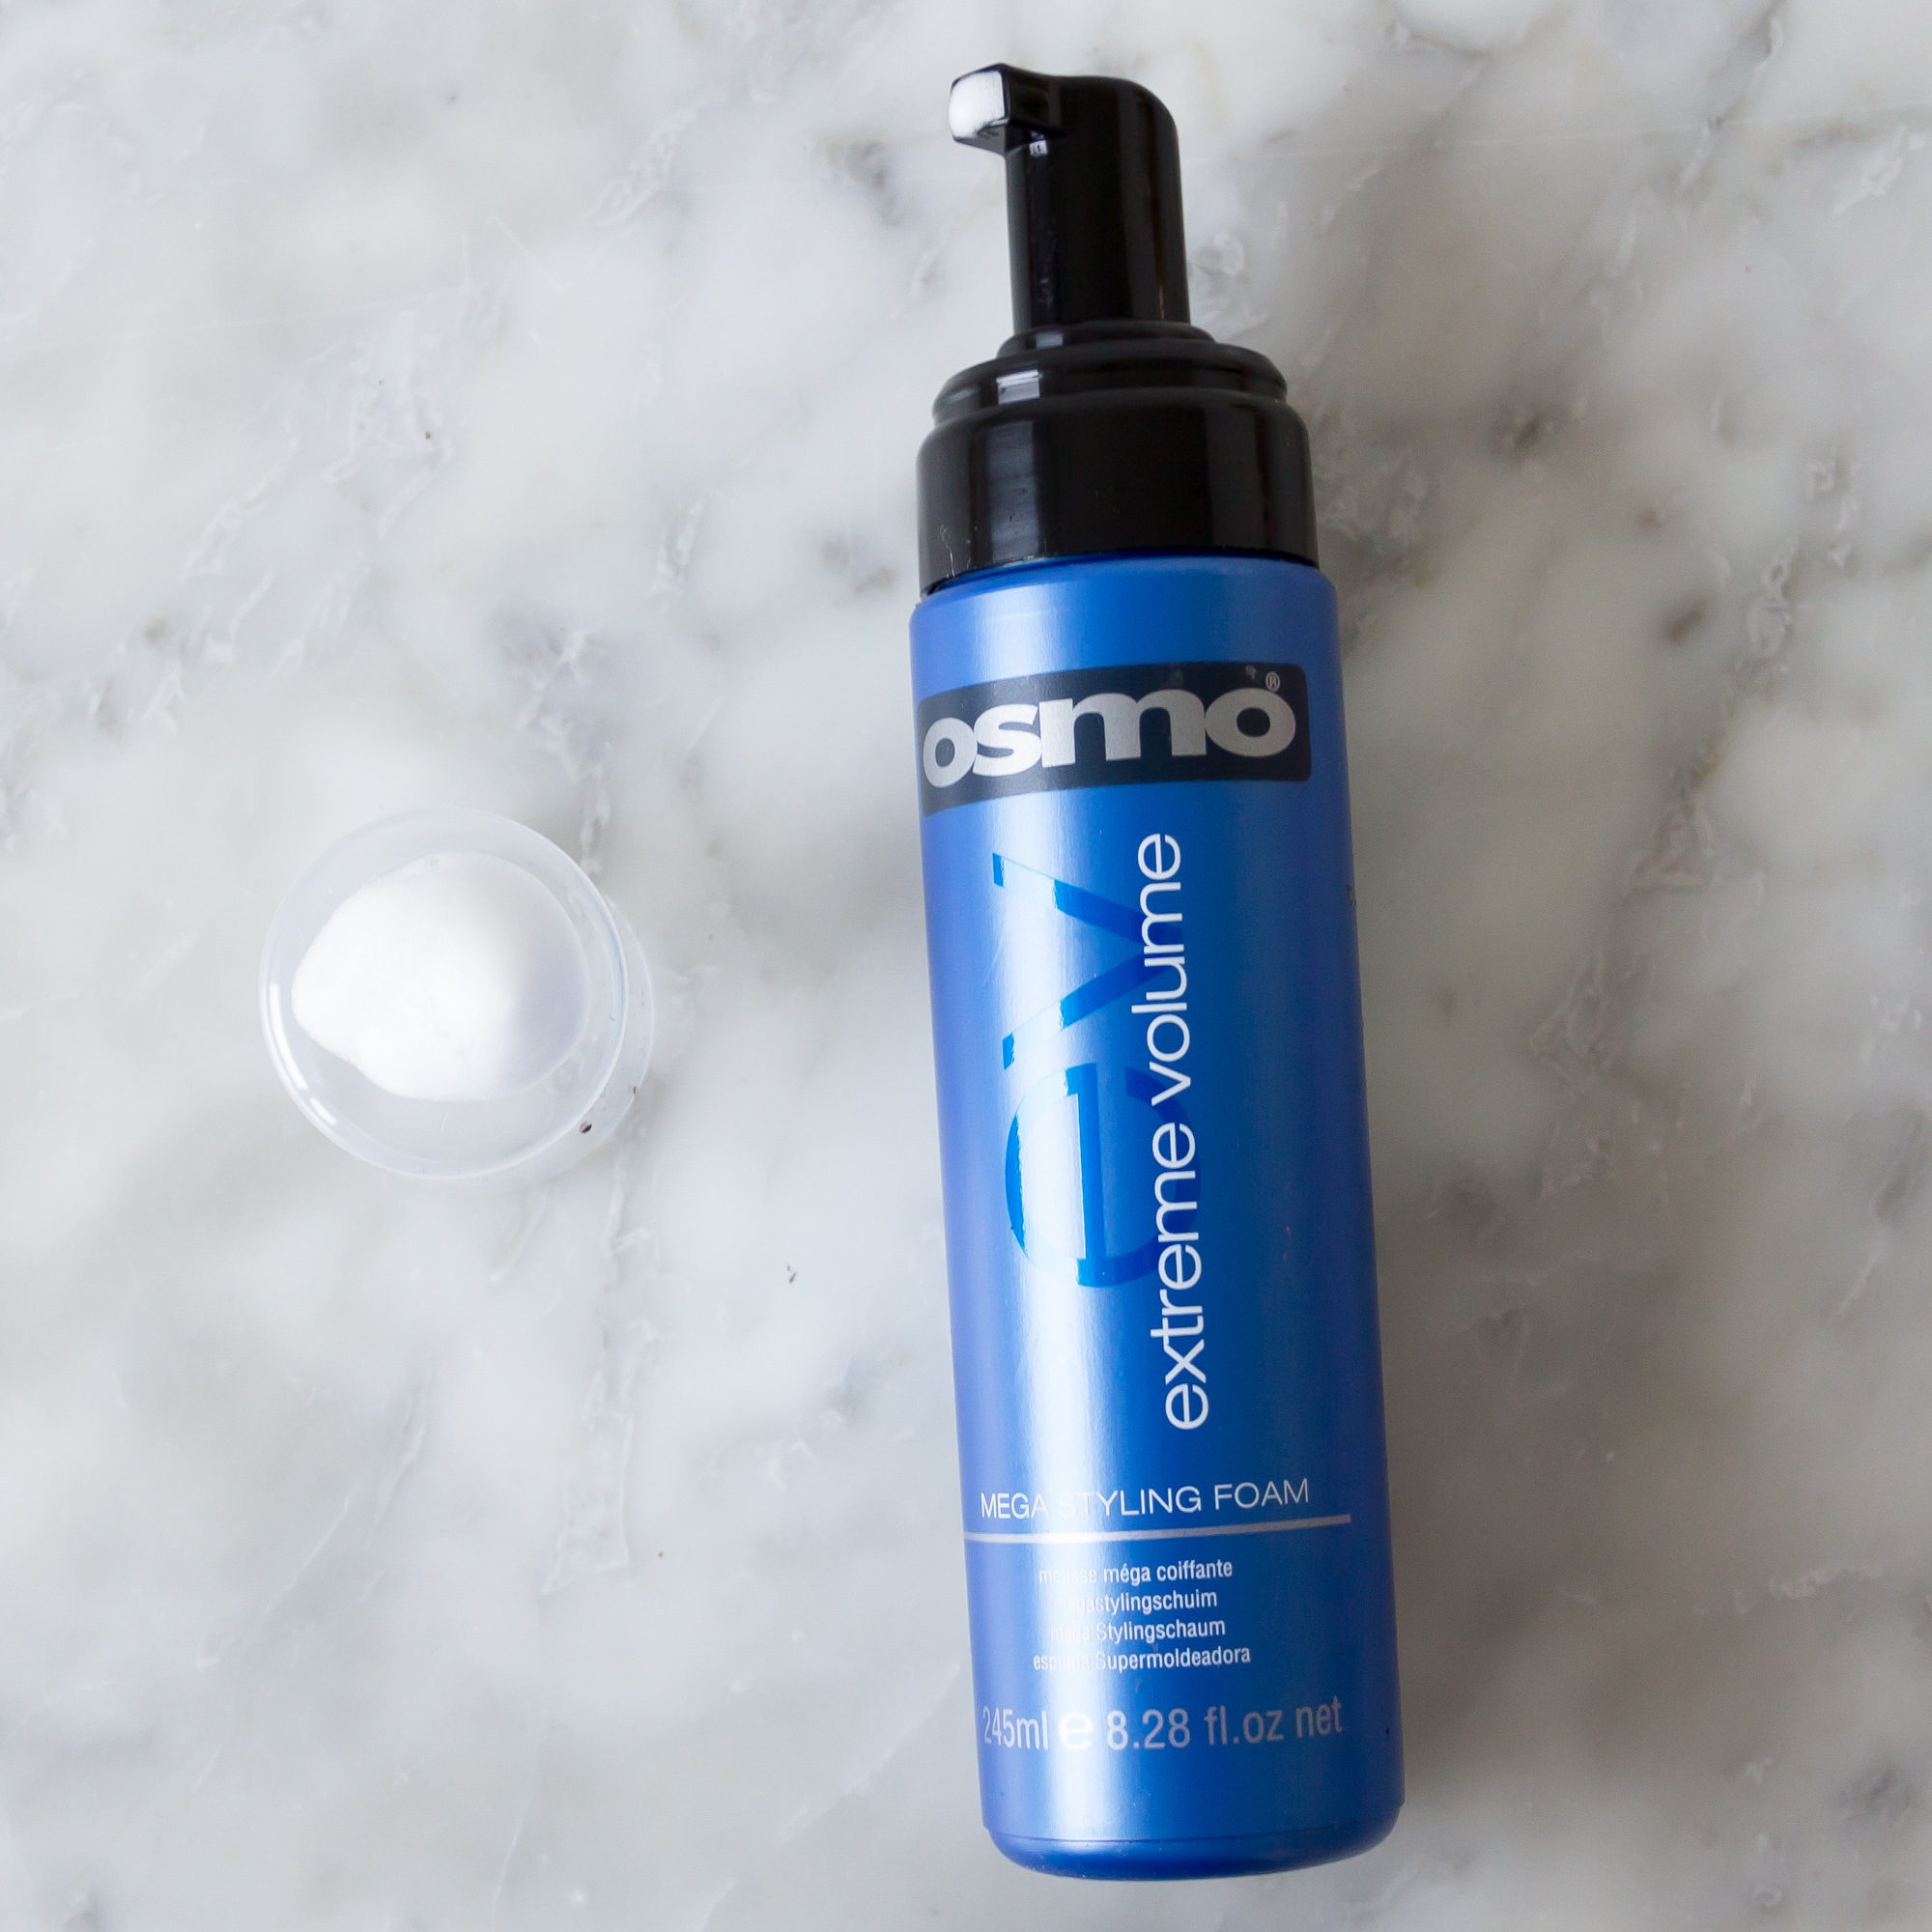 How to use hair mousse - Osmo Cosmetics - Strikeapose